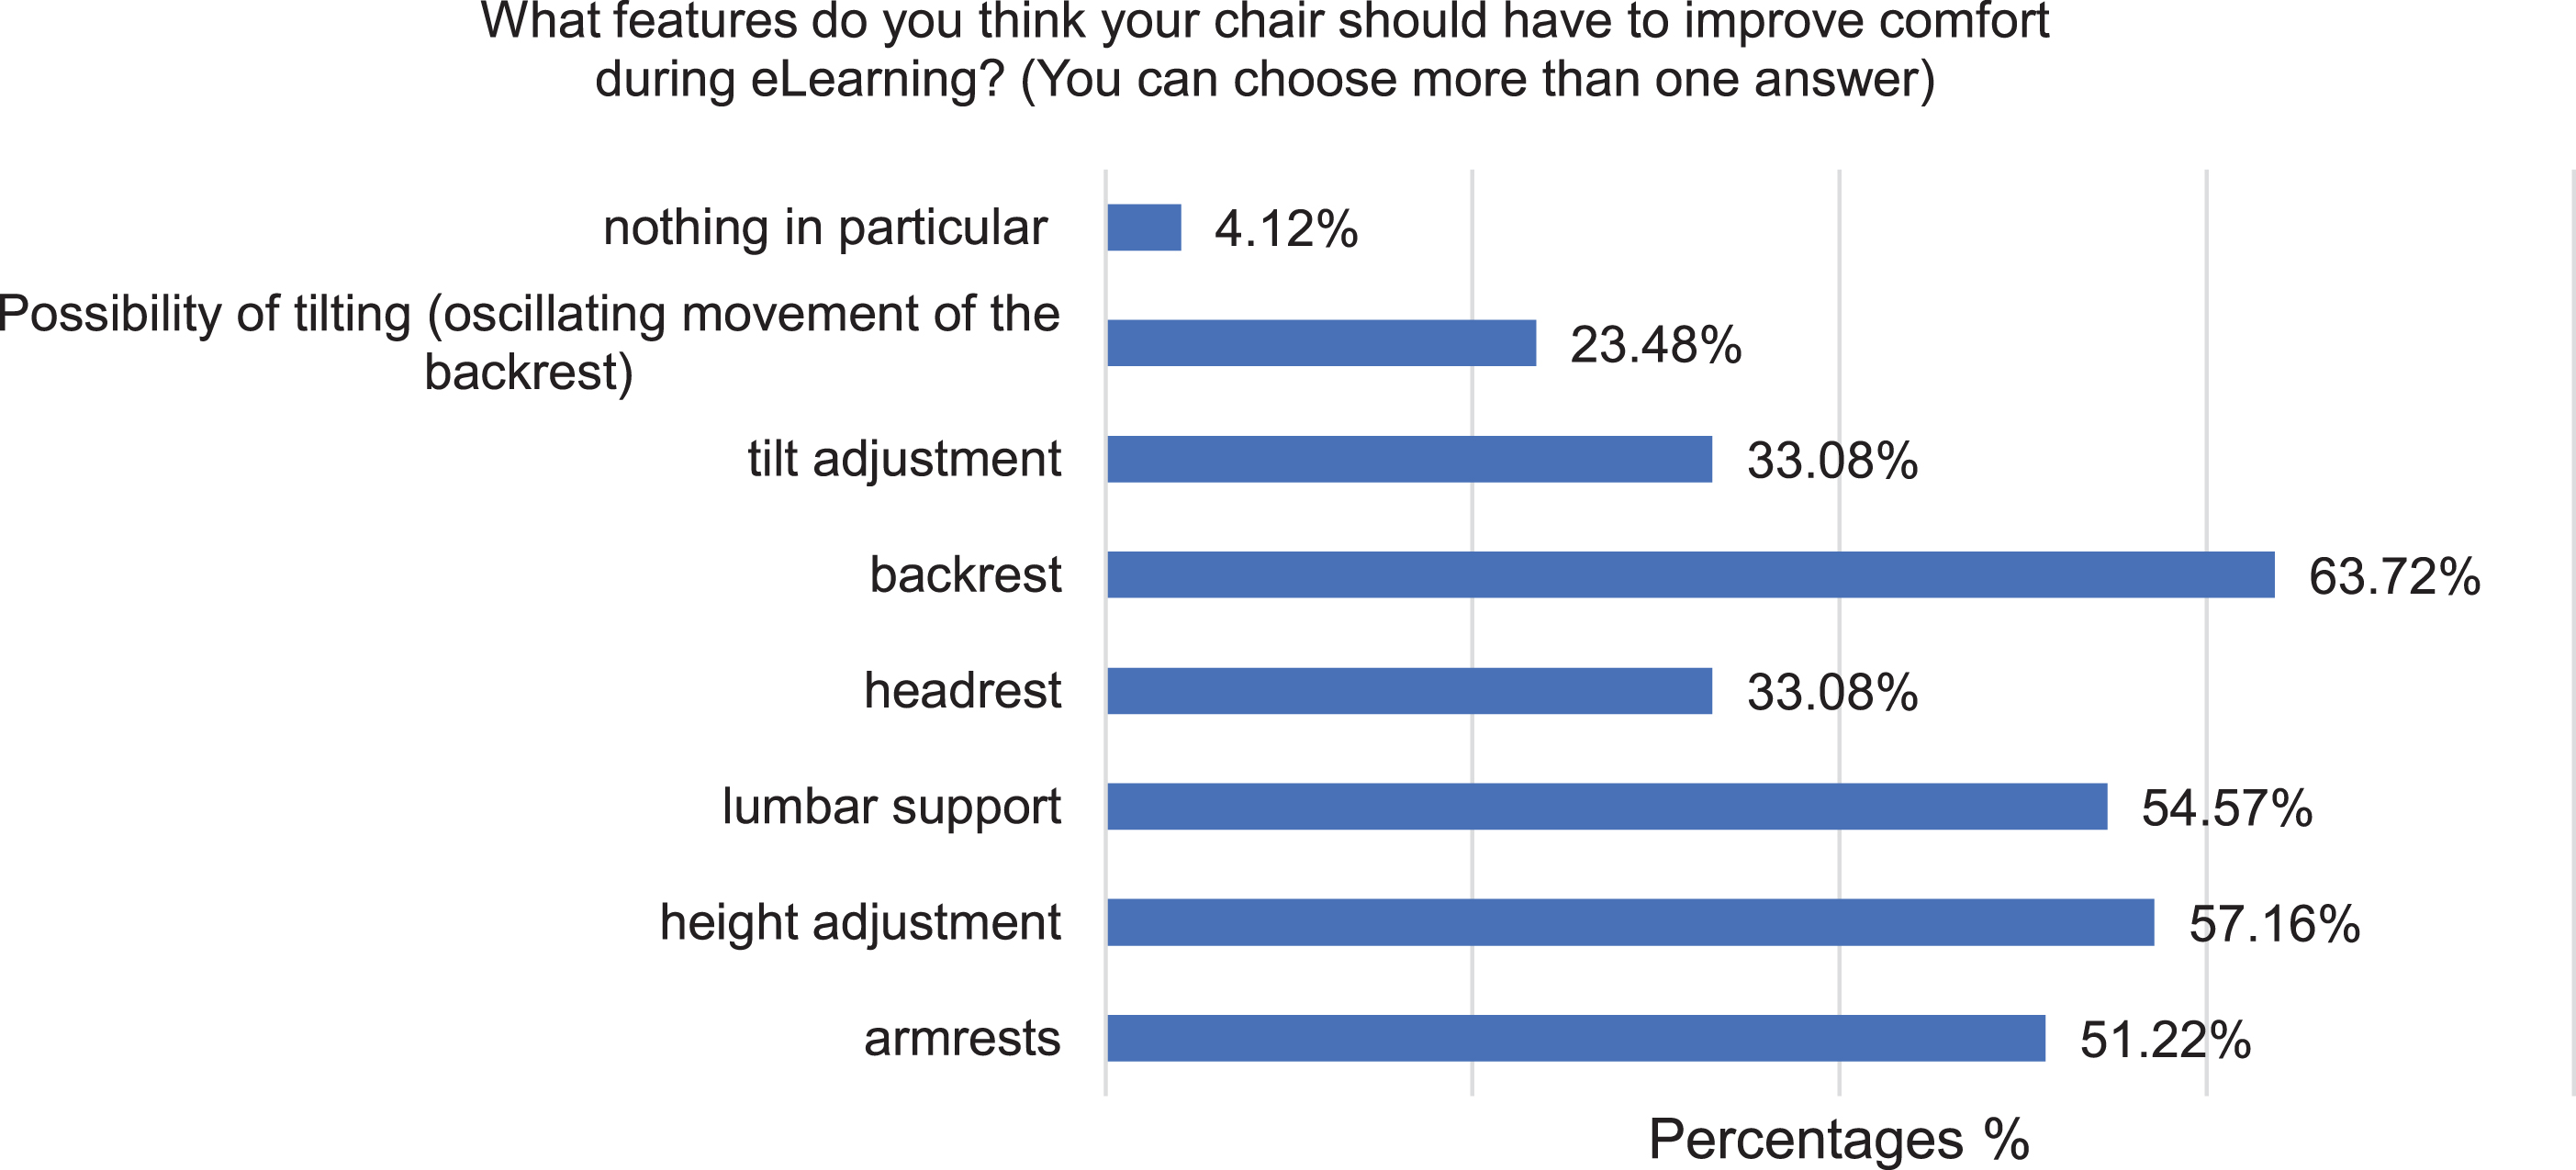 Percentages of essential chair feature to improve perceived comfort during eLearning lessons.